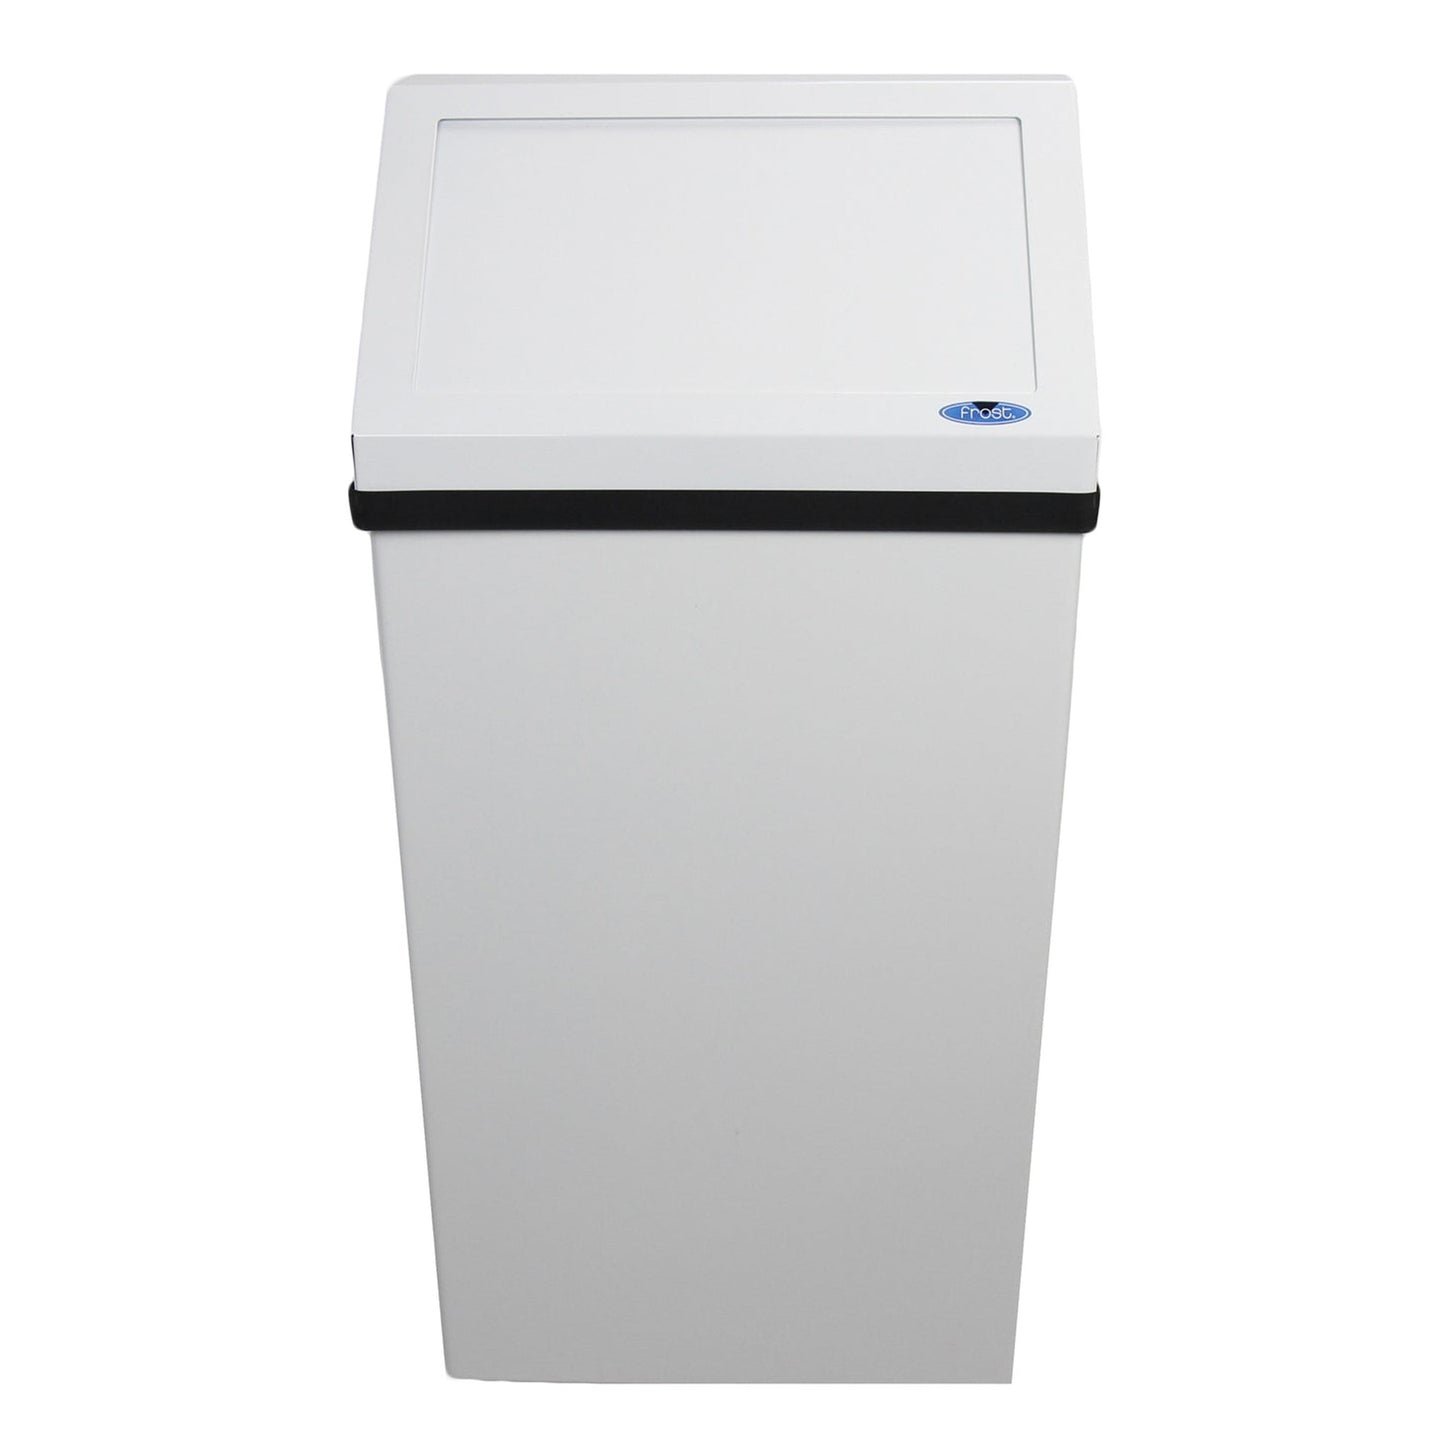 Frost 303-NL Wall Mounted White Waste Receptacle